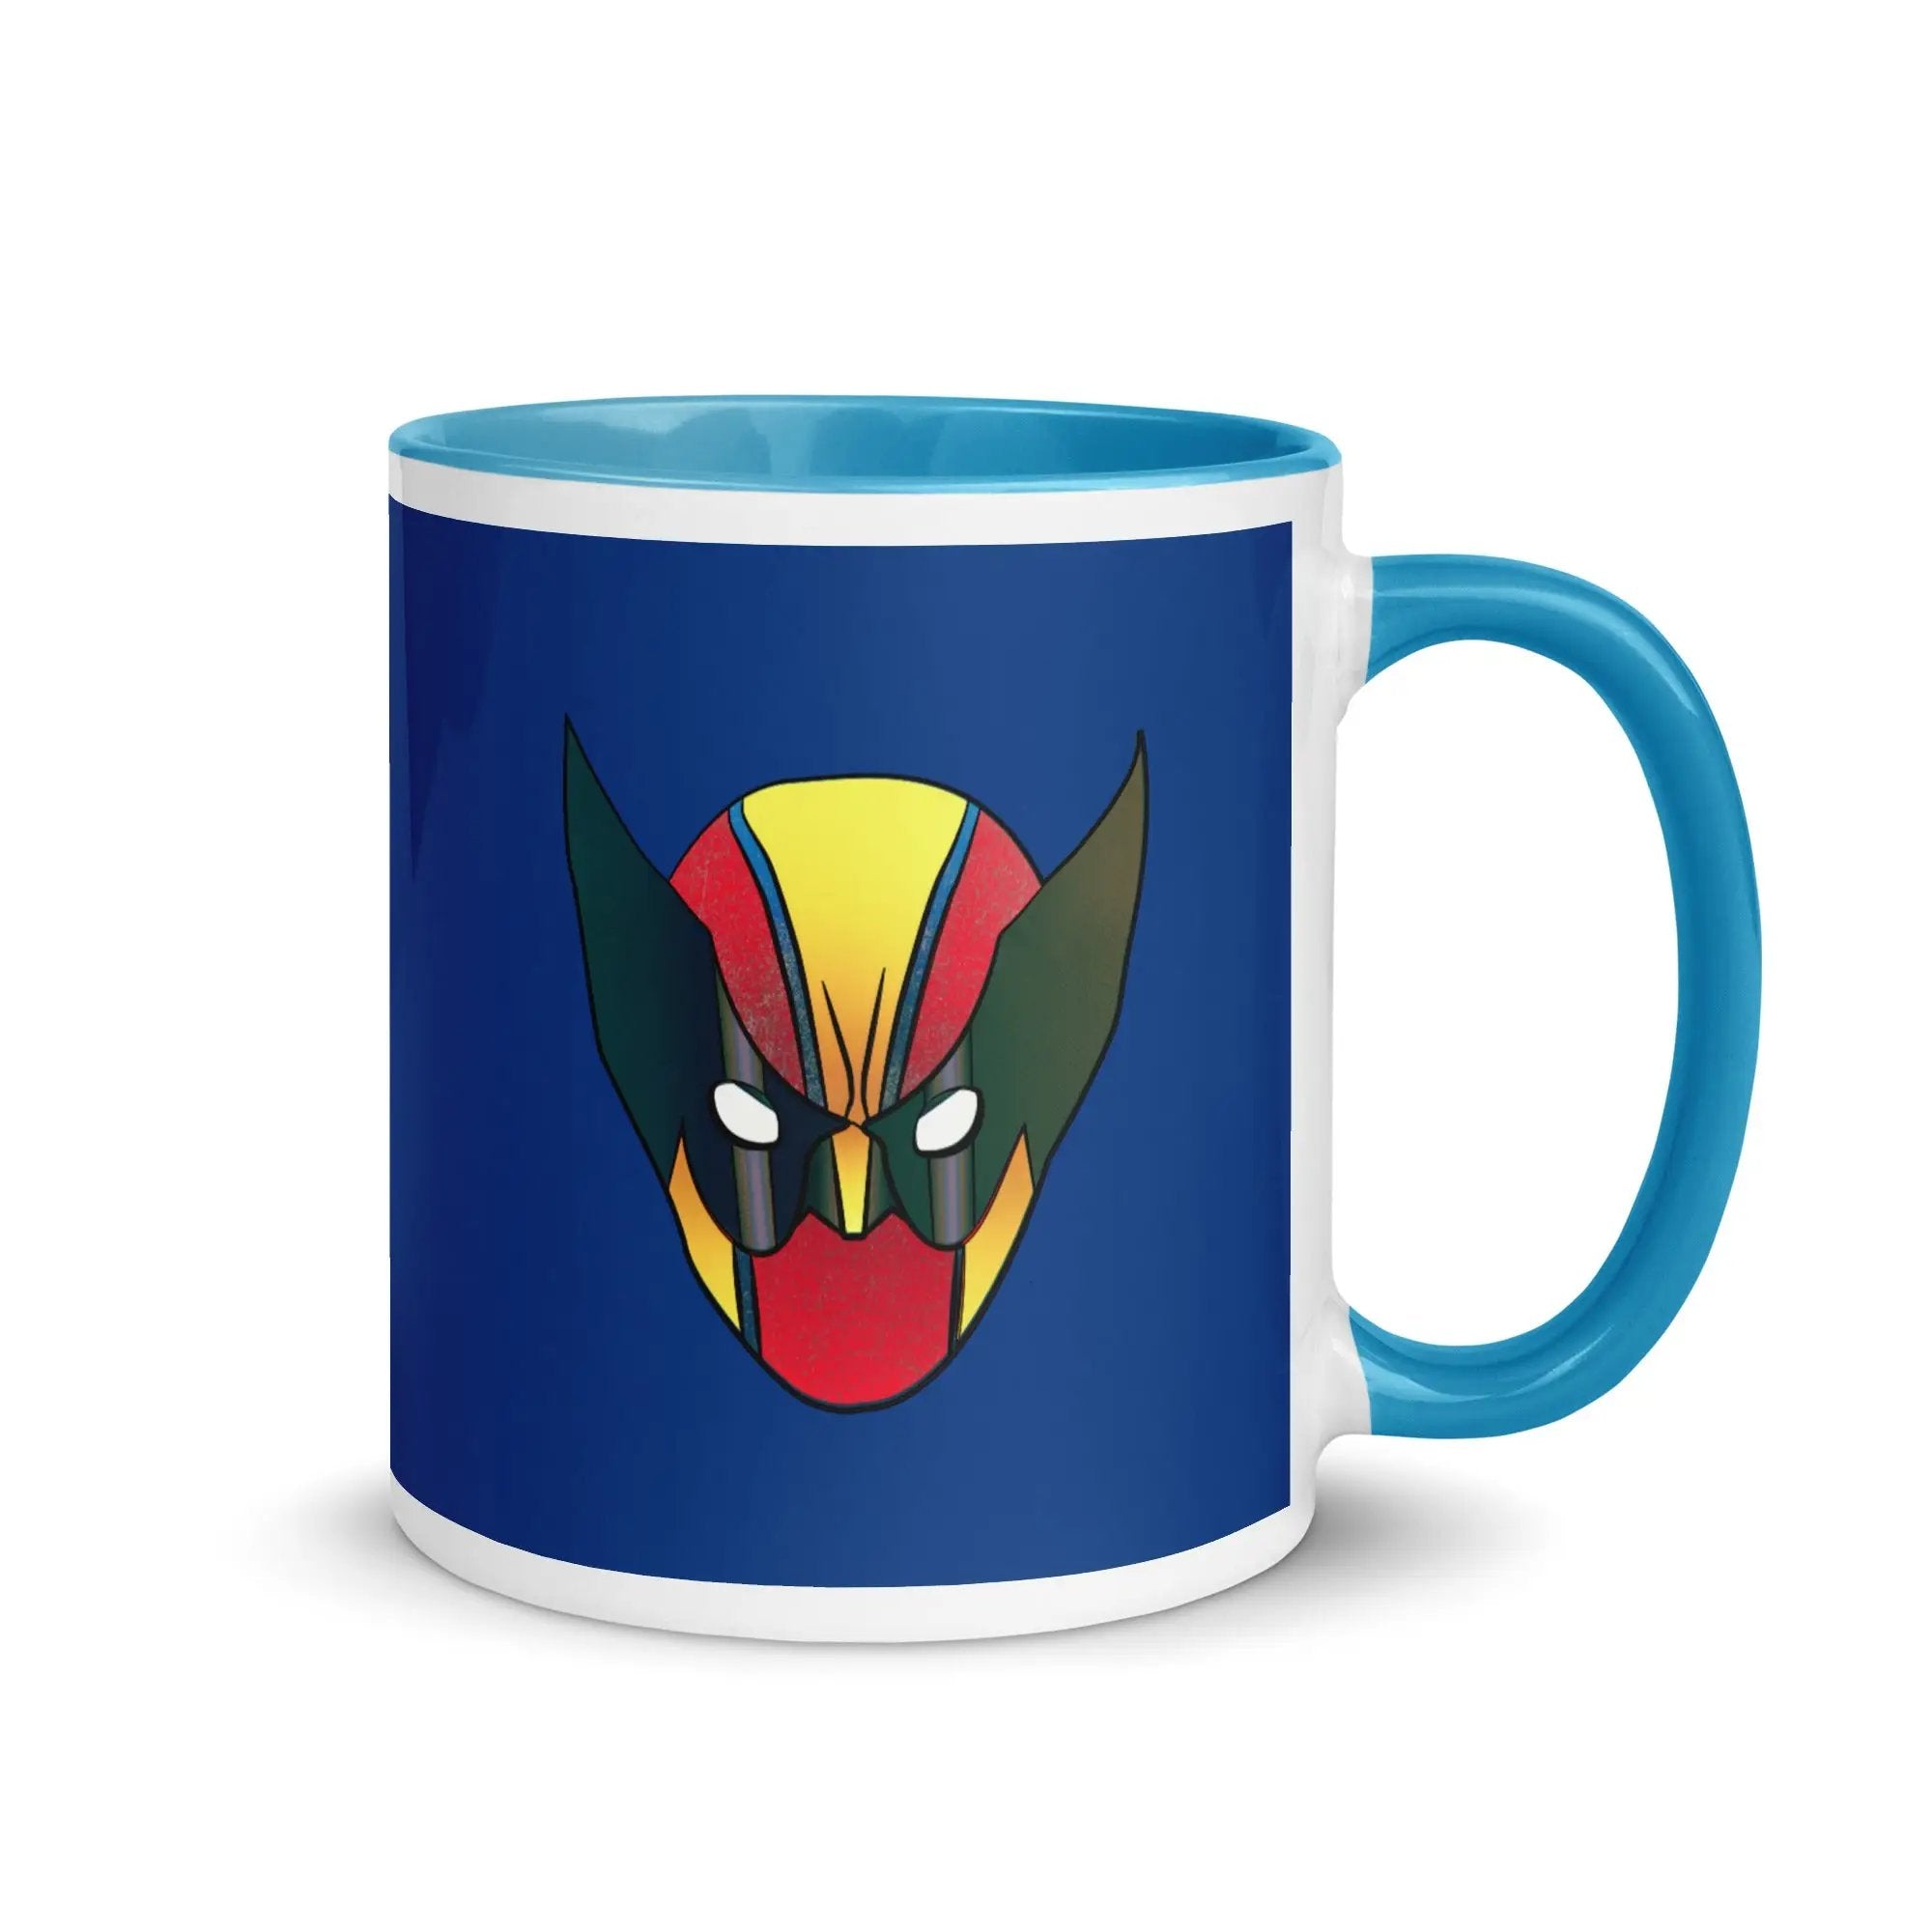 a blue and white mug with a wolverine face on it